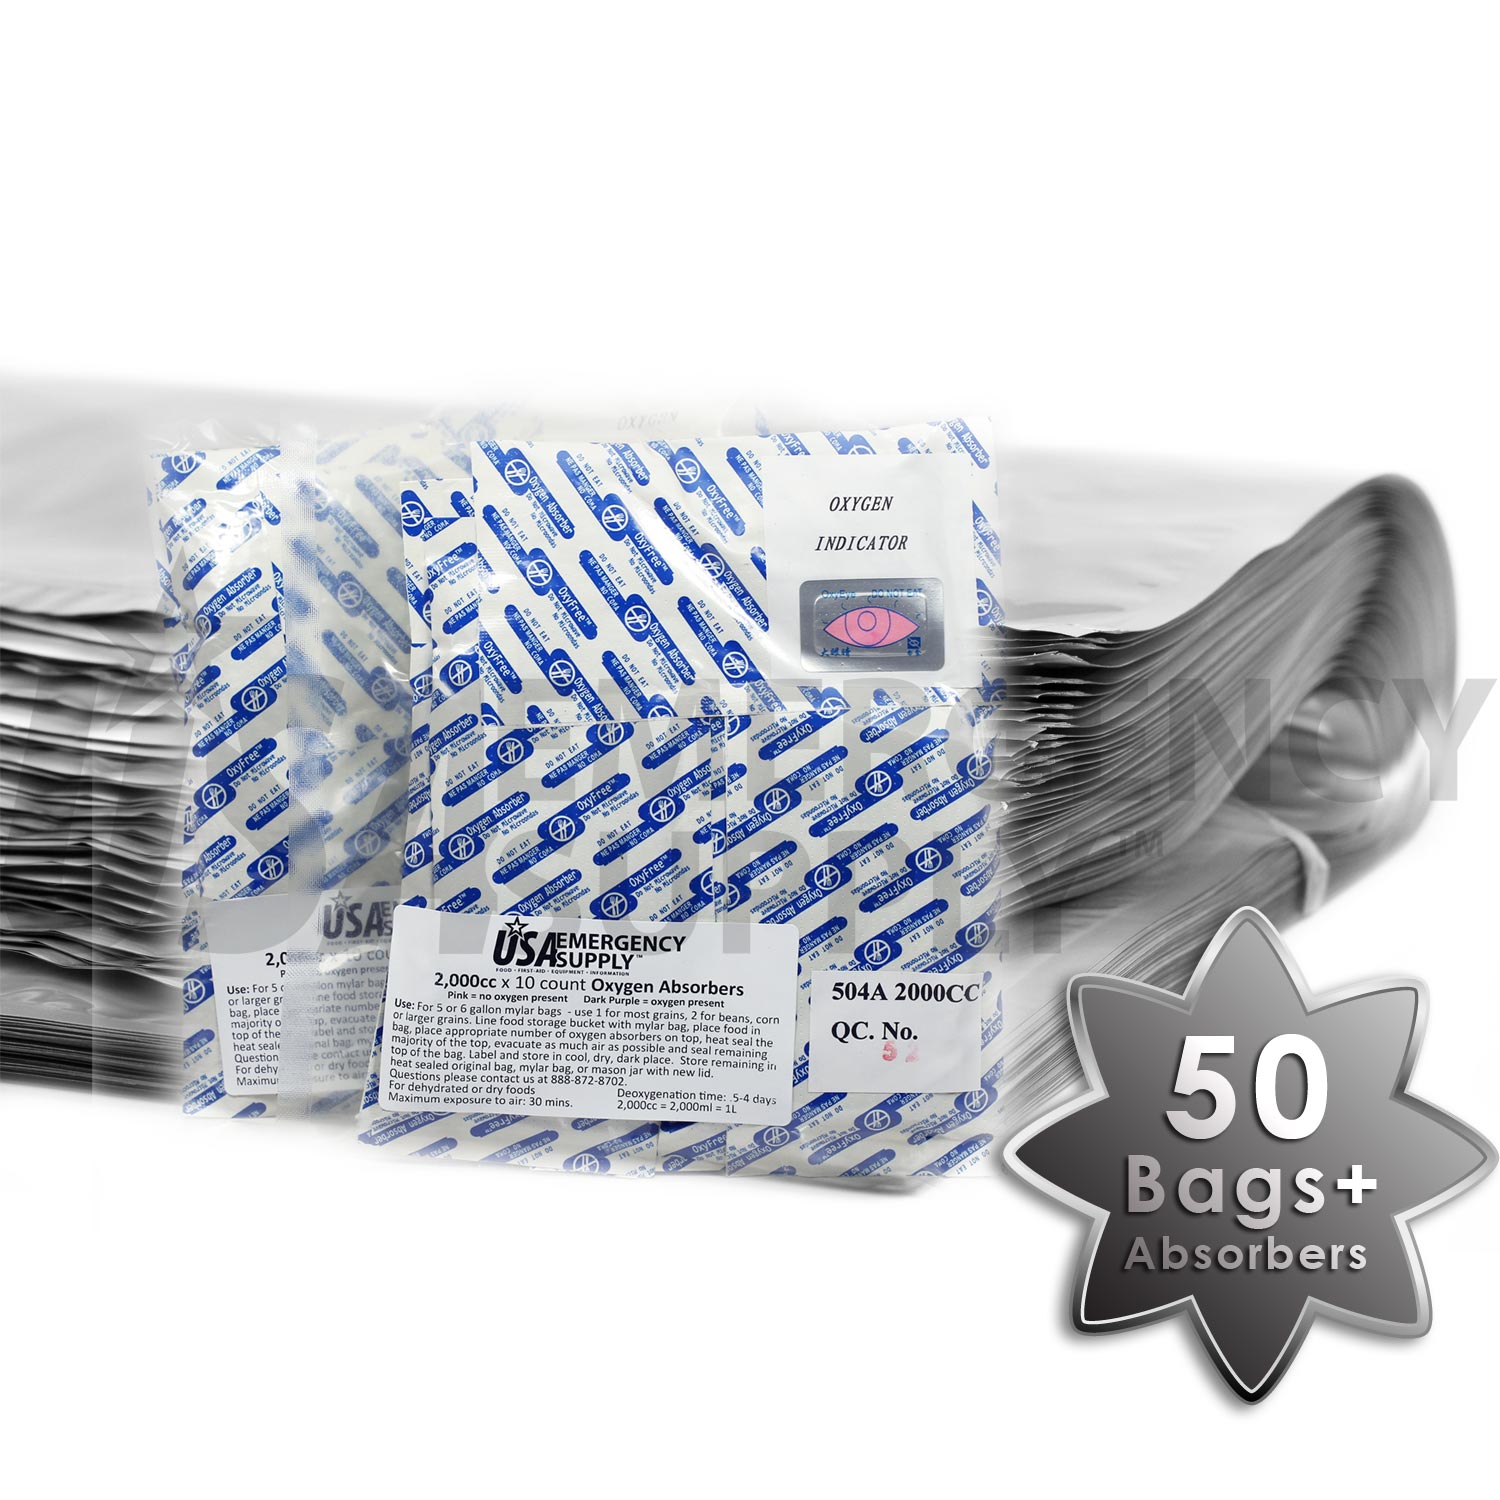 18x28 Mylar Bags, 5 Mil 5-Gallon, Case of 150 - Discount Mylar Bags